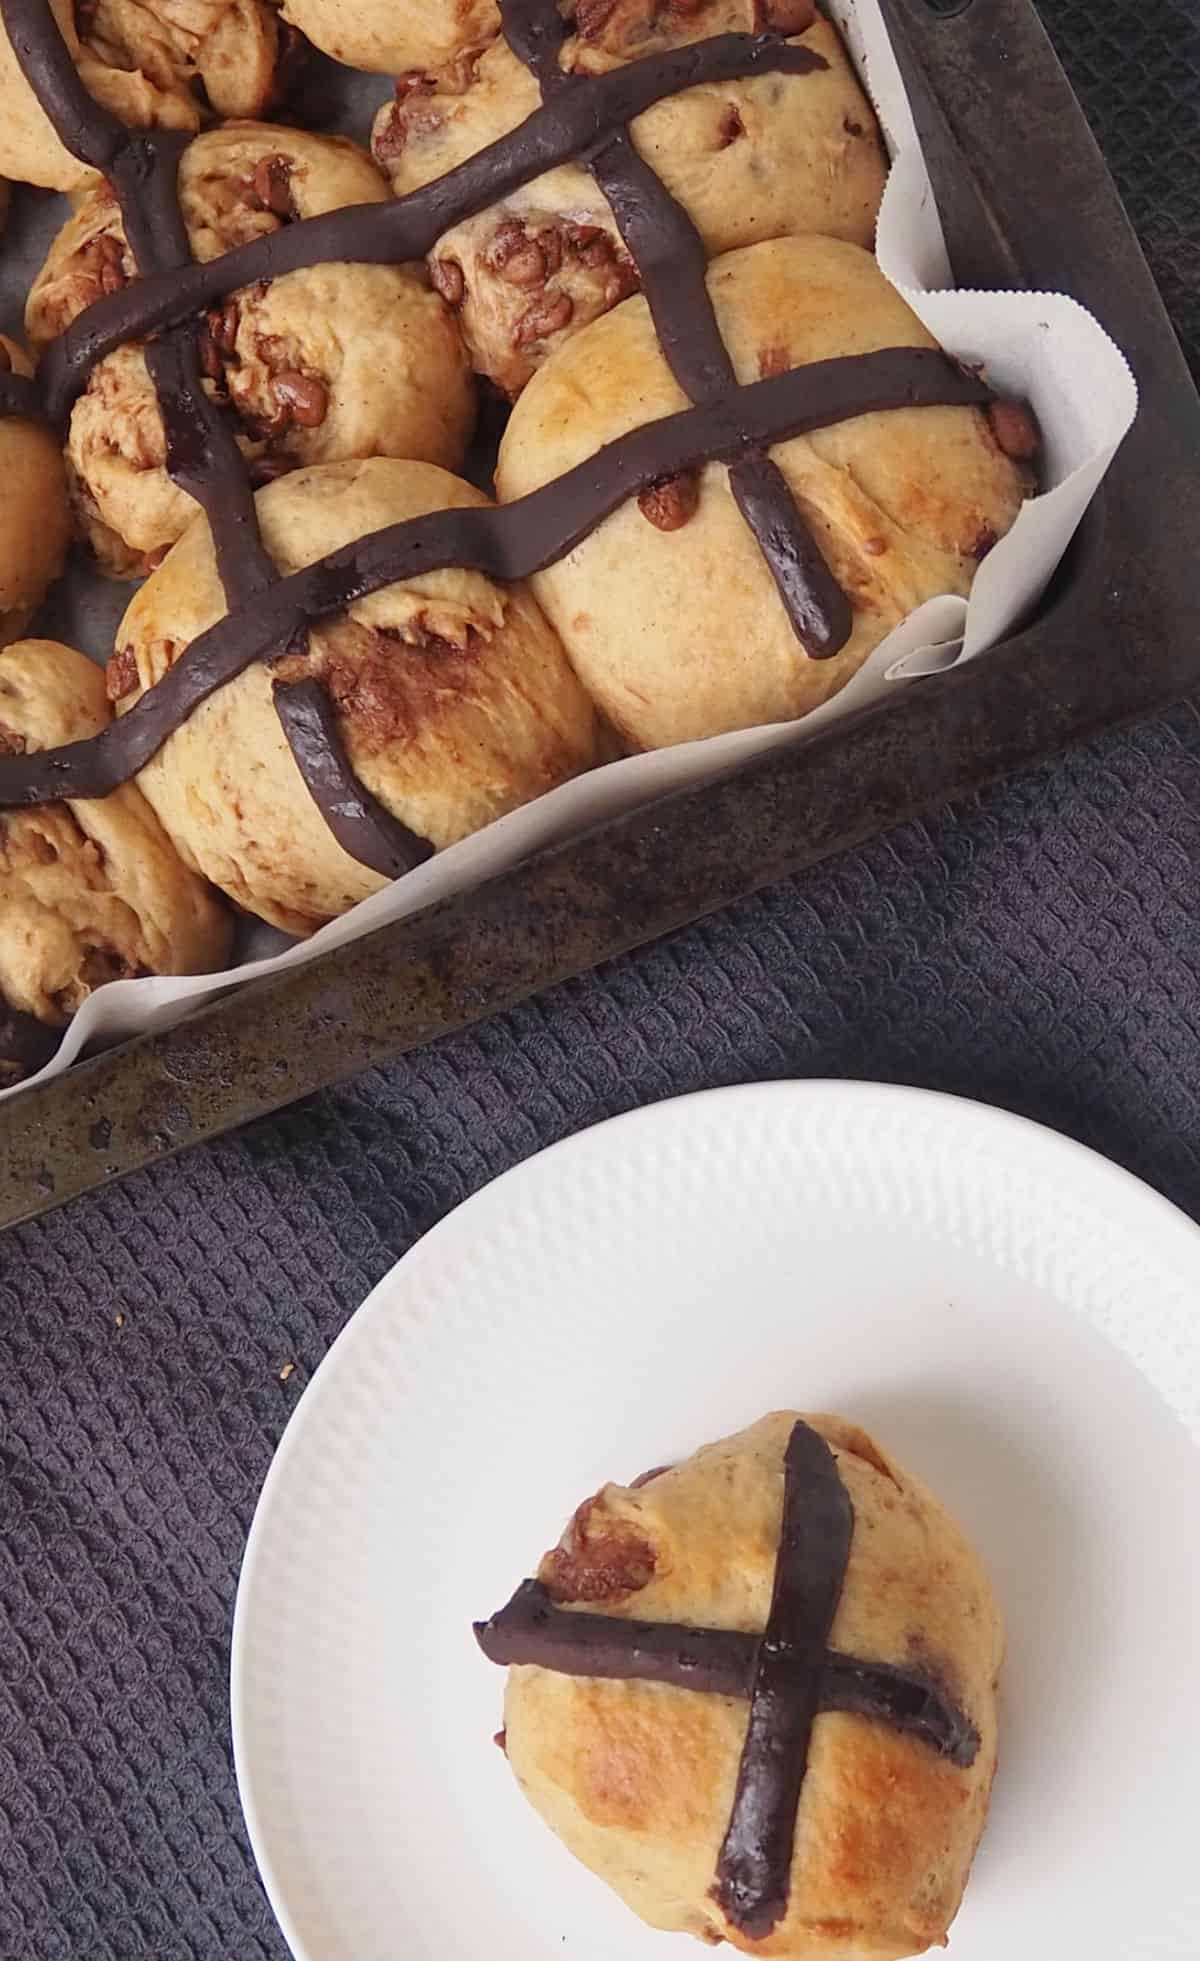 Overhead view of Chocolate Chip Hot Cross Buns.